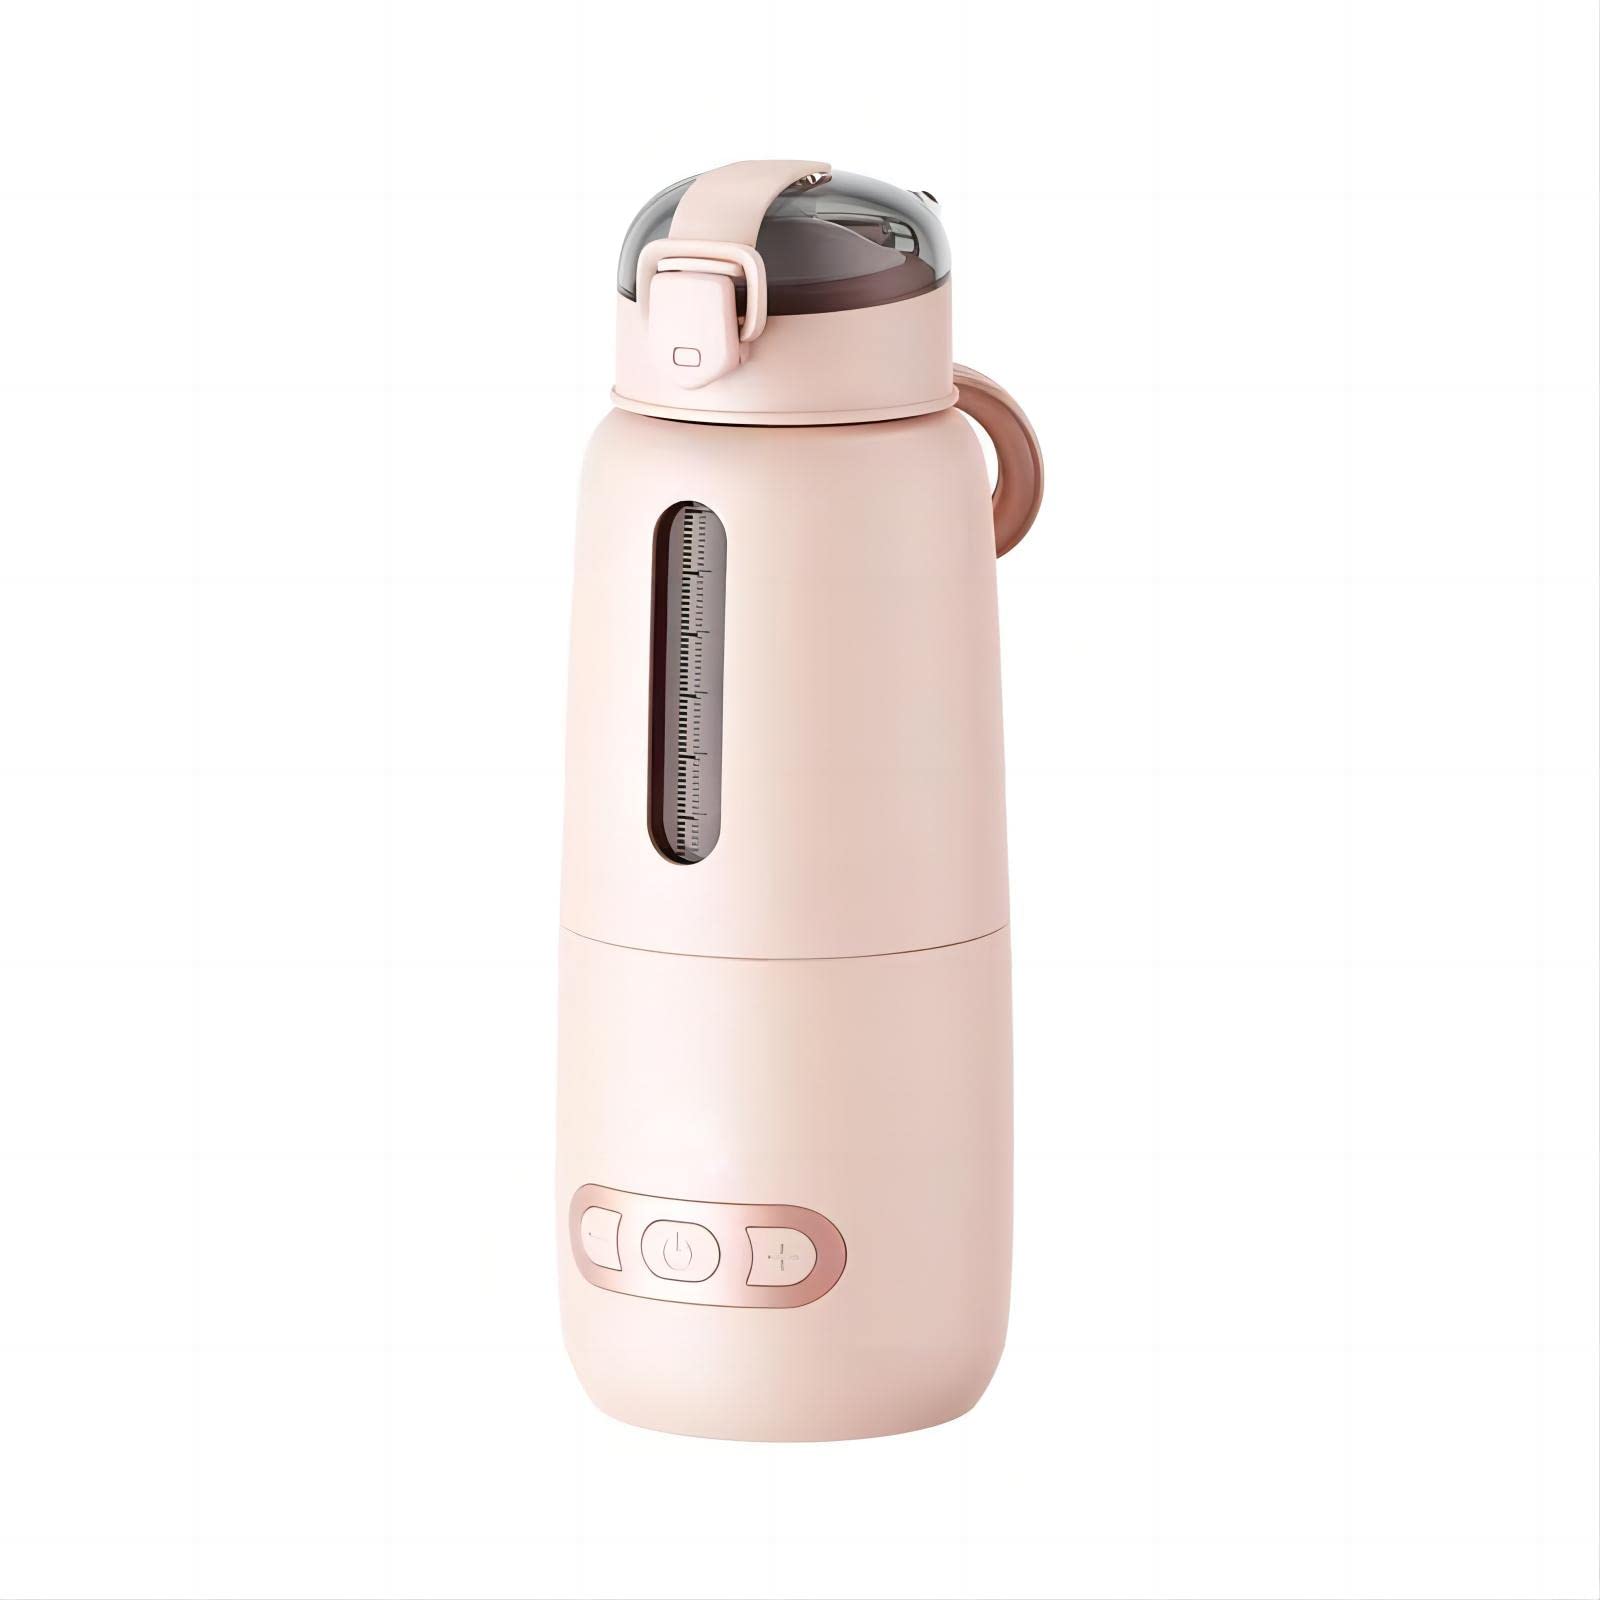 Takyyds Smart Portable Milk Warmer Rechargeable USB Bottle Warmer for Baby  Breastmilk and Formula Portable Water Warmer Instant Water Warmer Smart Baby  Flask (Pink)